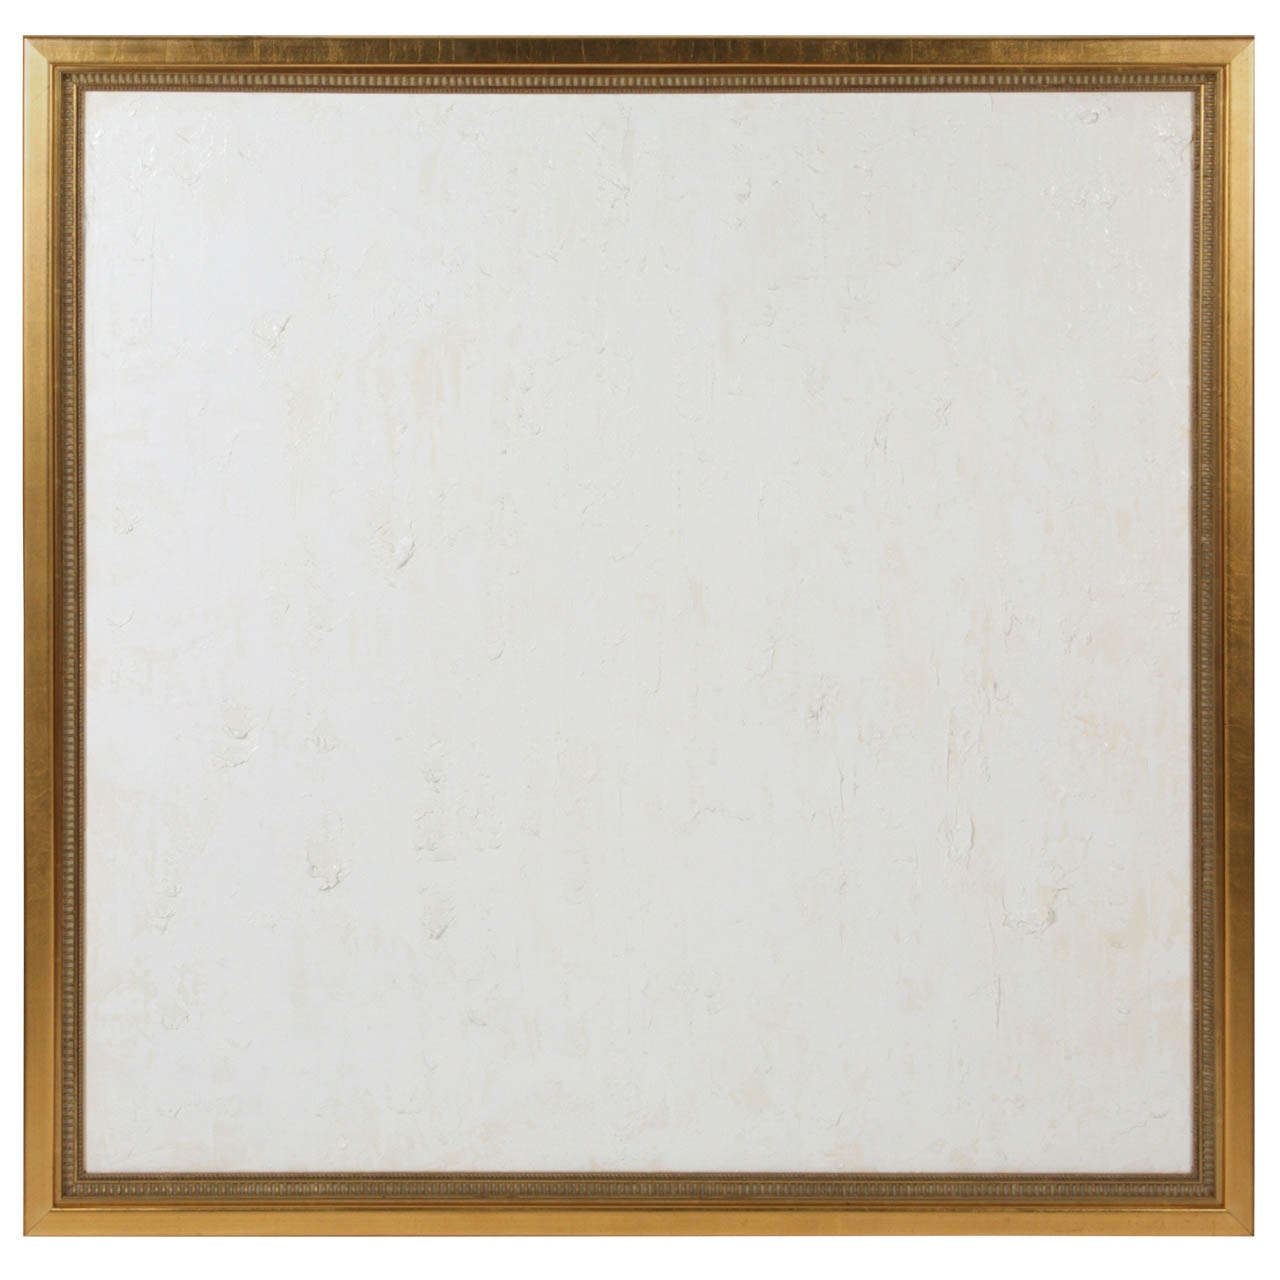 "White Study #1" by Lindsay Cowles